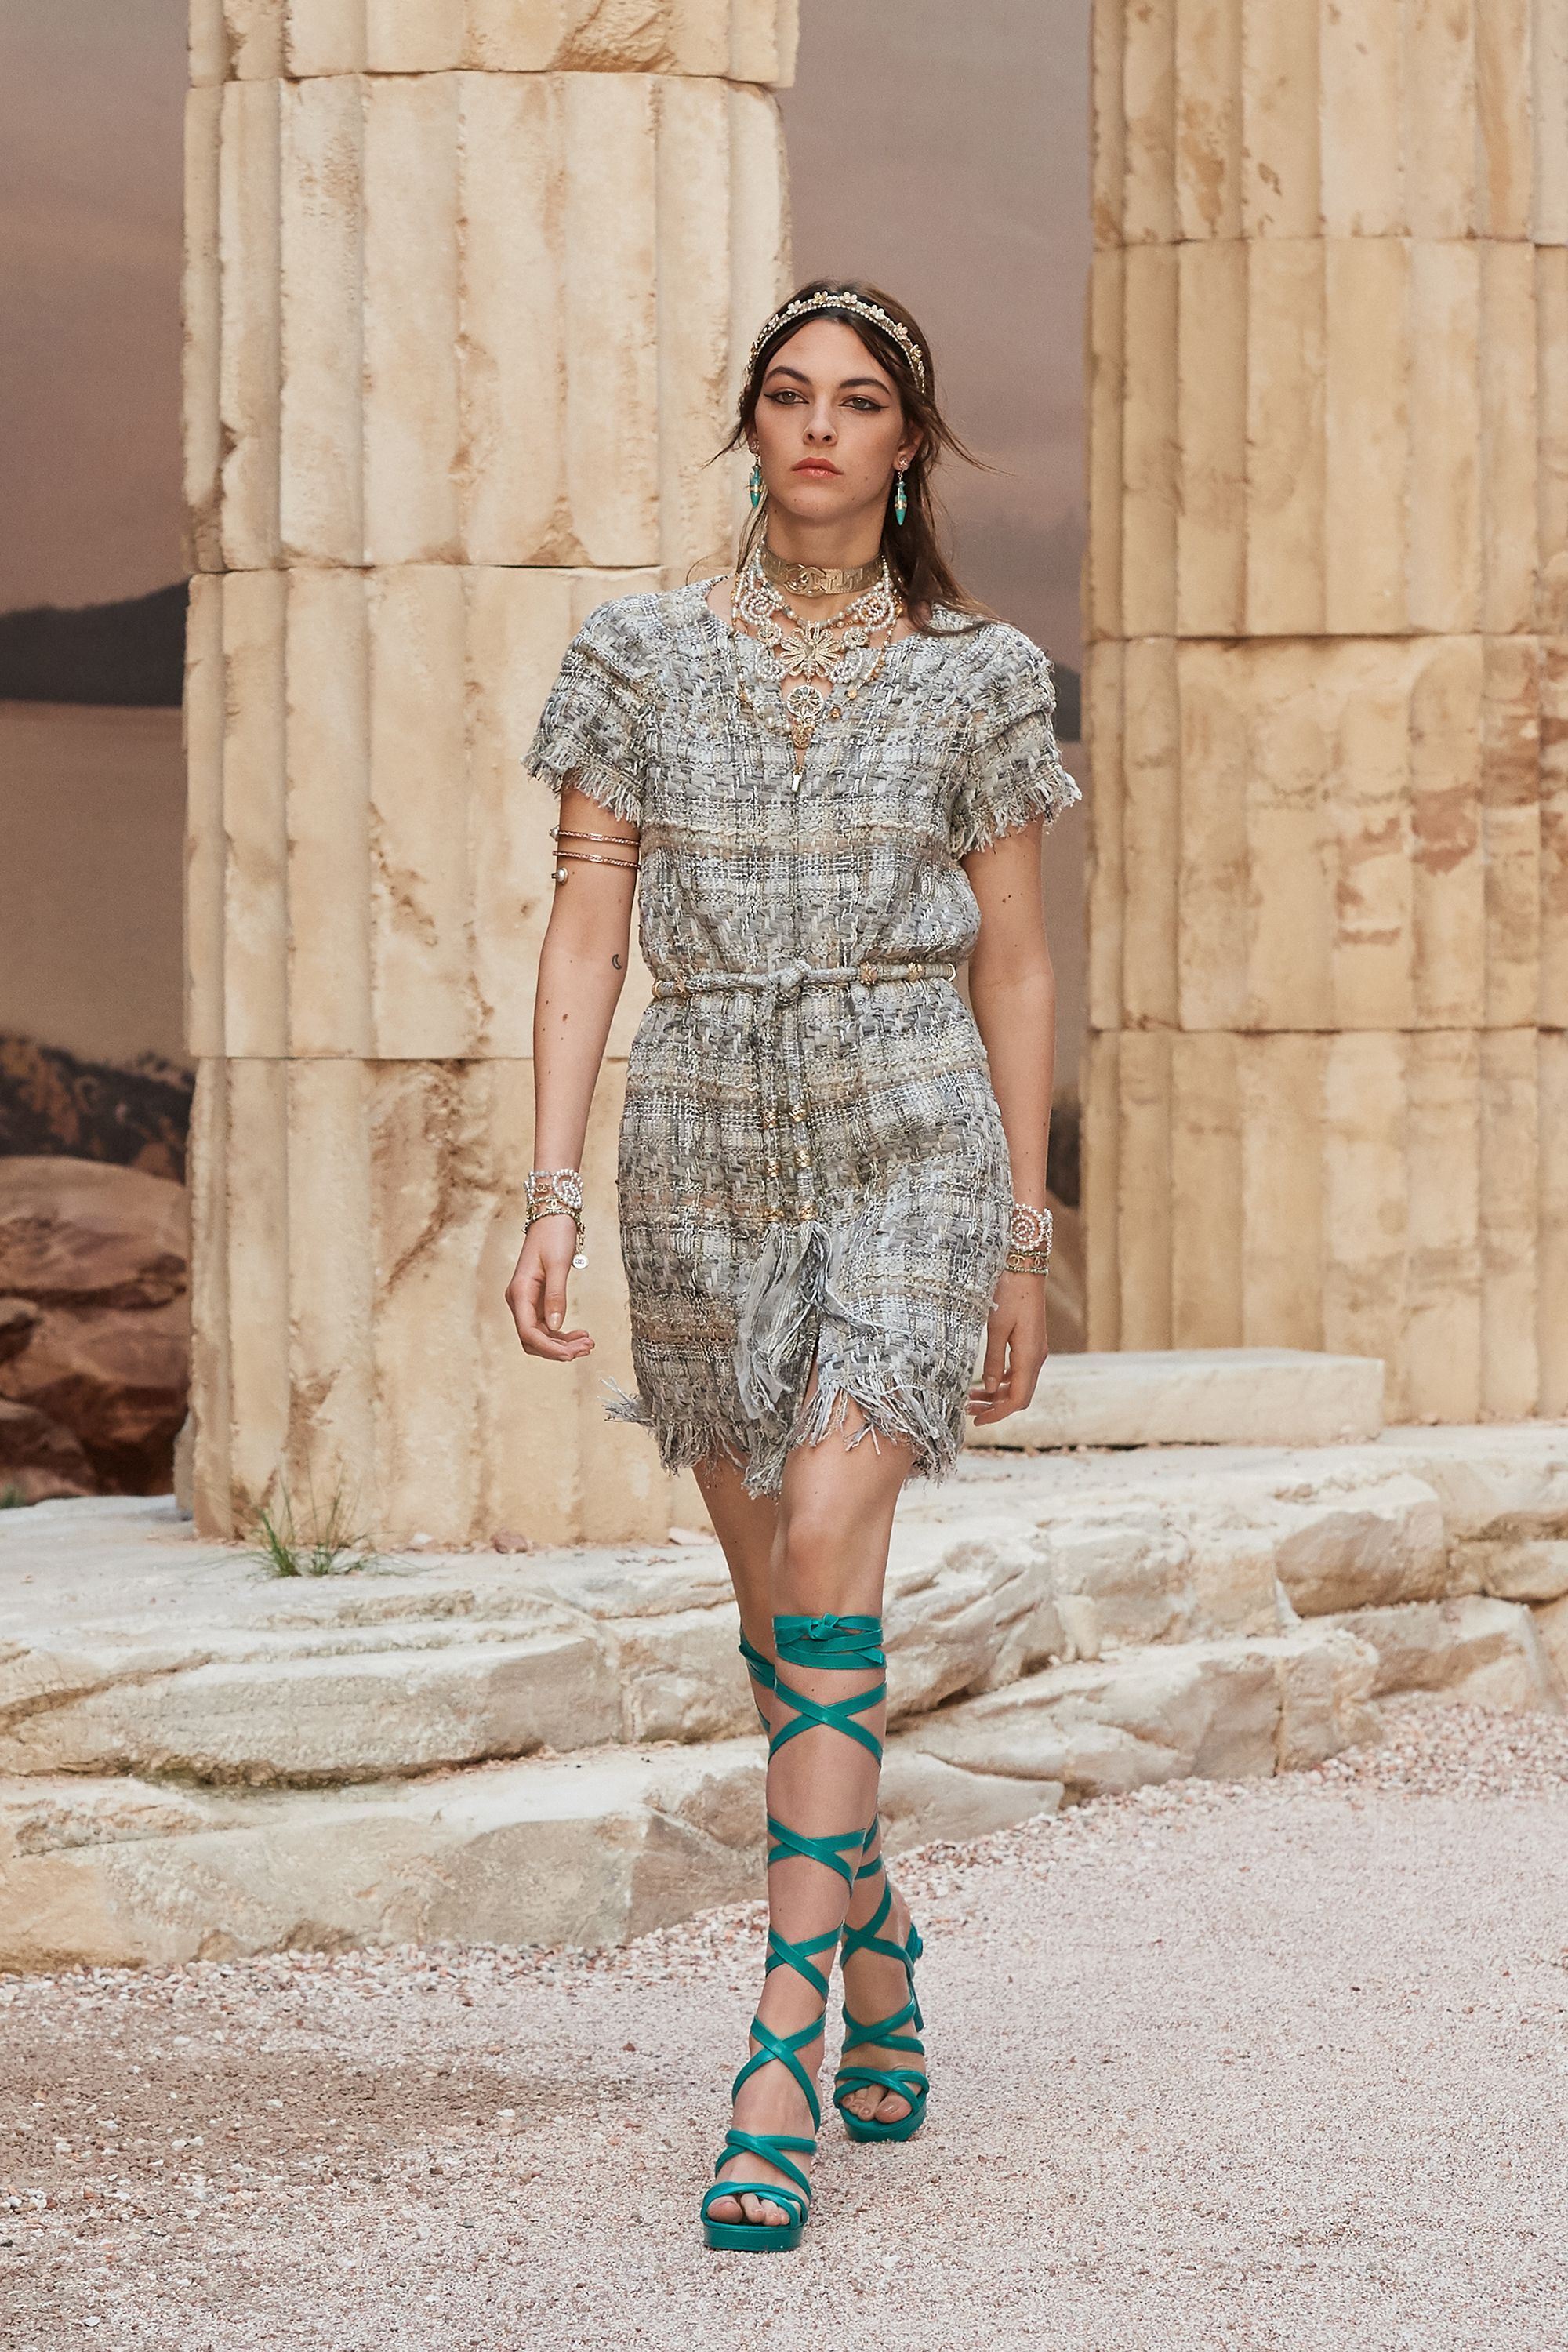 Chanel Built an Ancient Grecian Temple for Its Very Literal Cruise